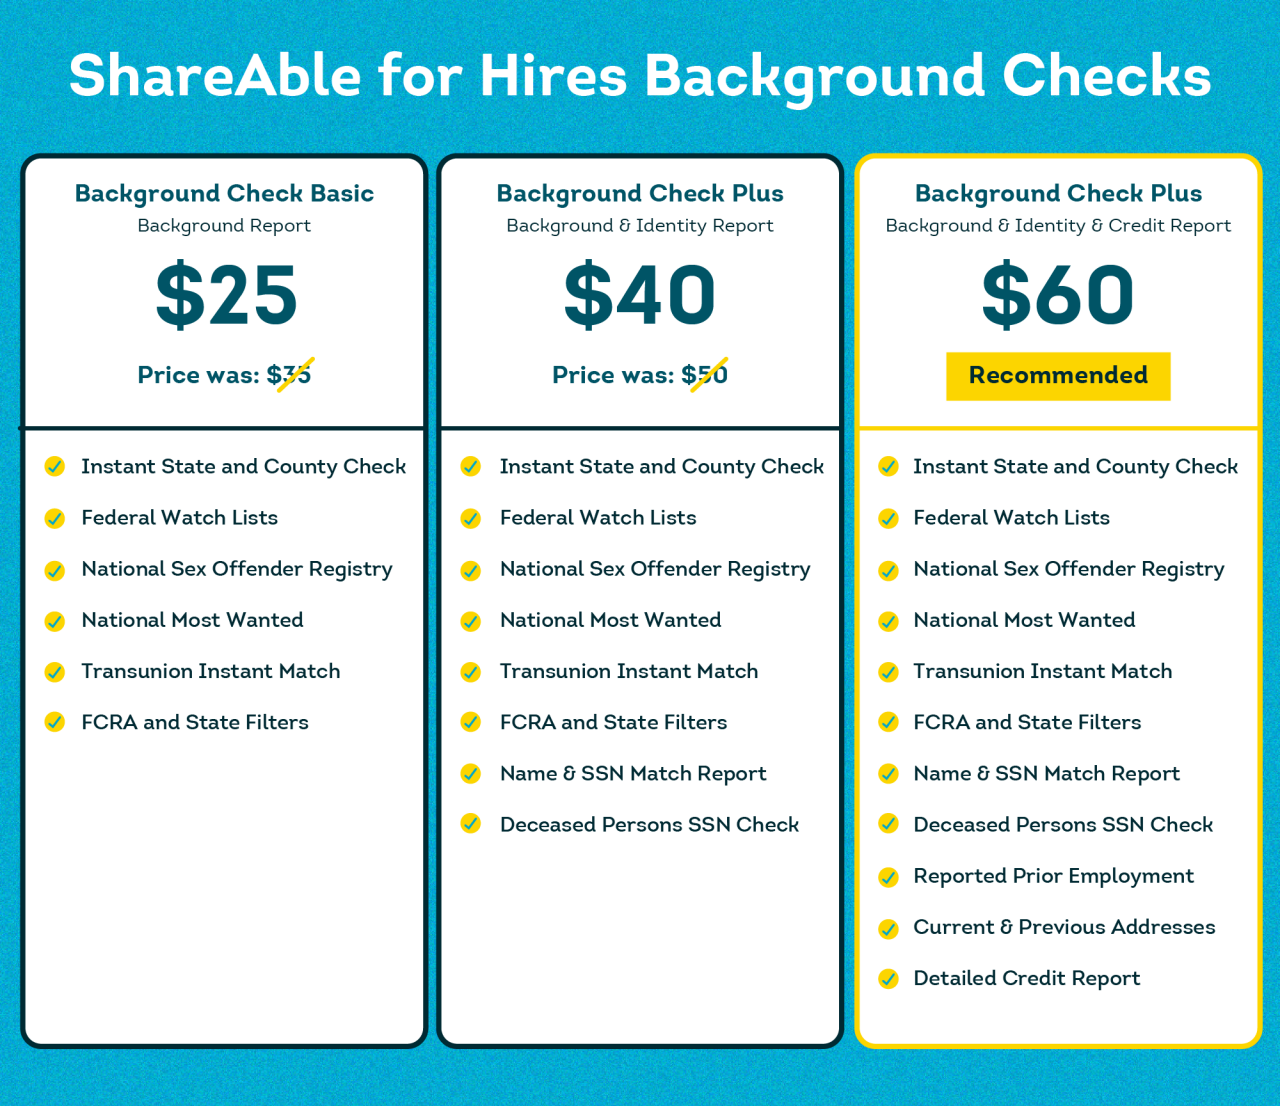 Screening through ShareAble for Hires provides fast, reliable data at affordable prices